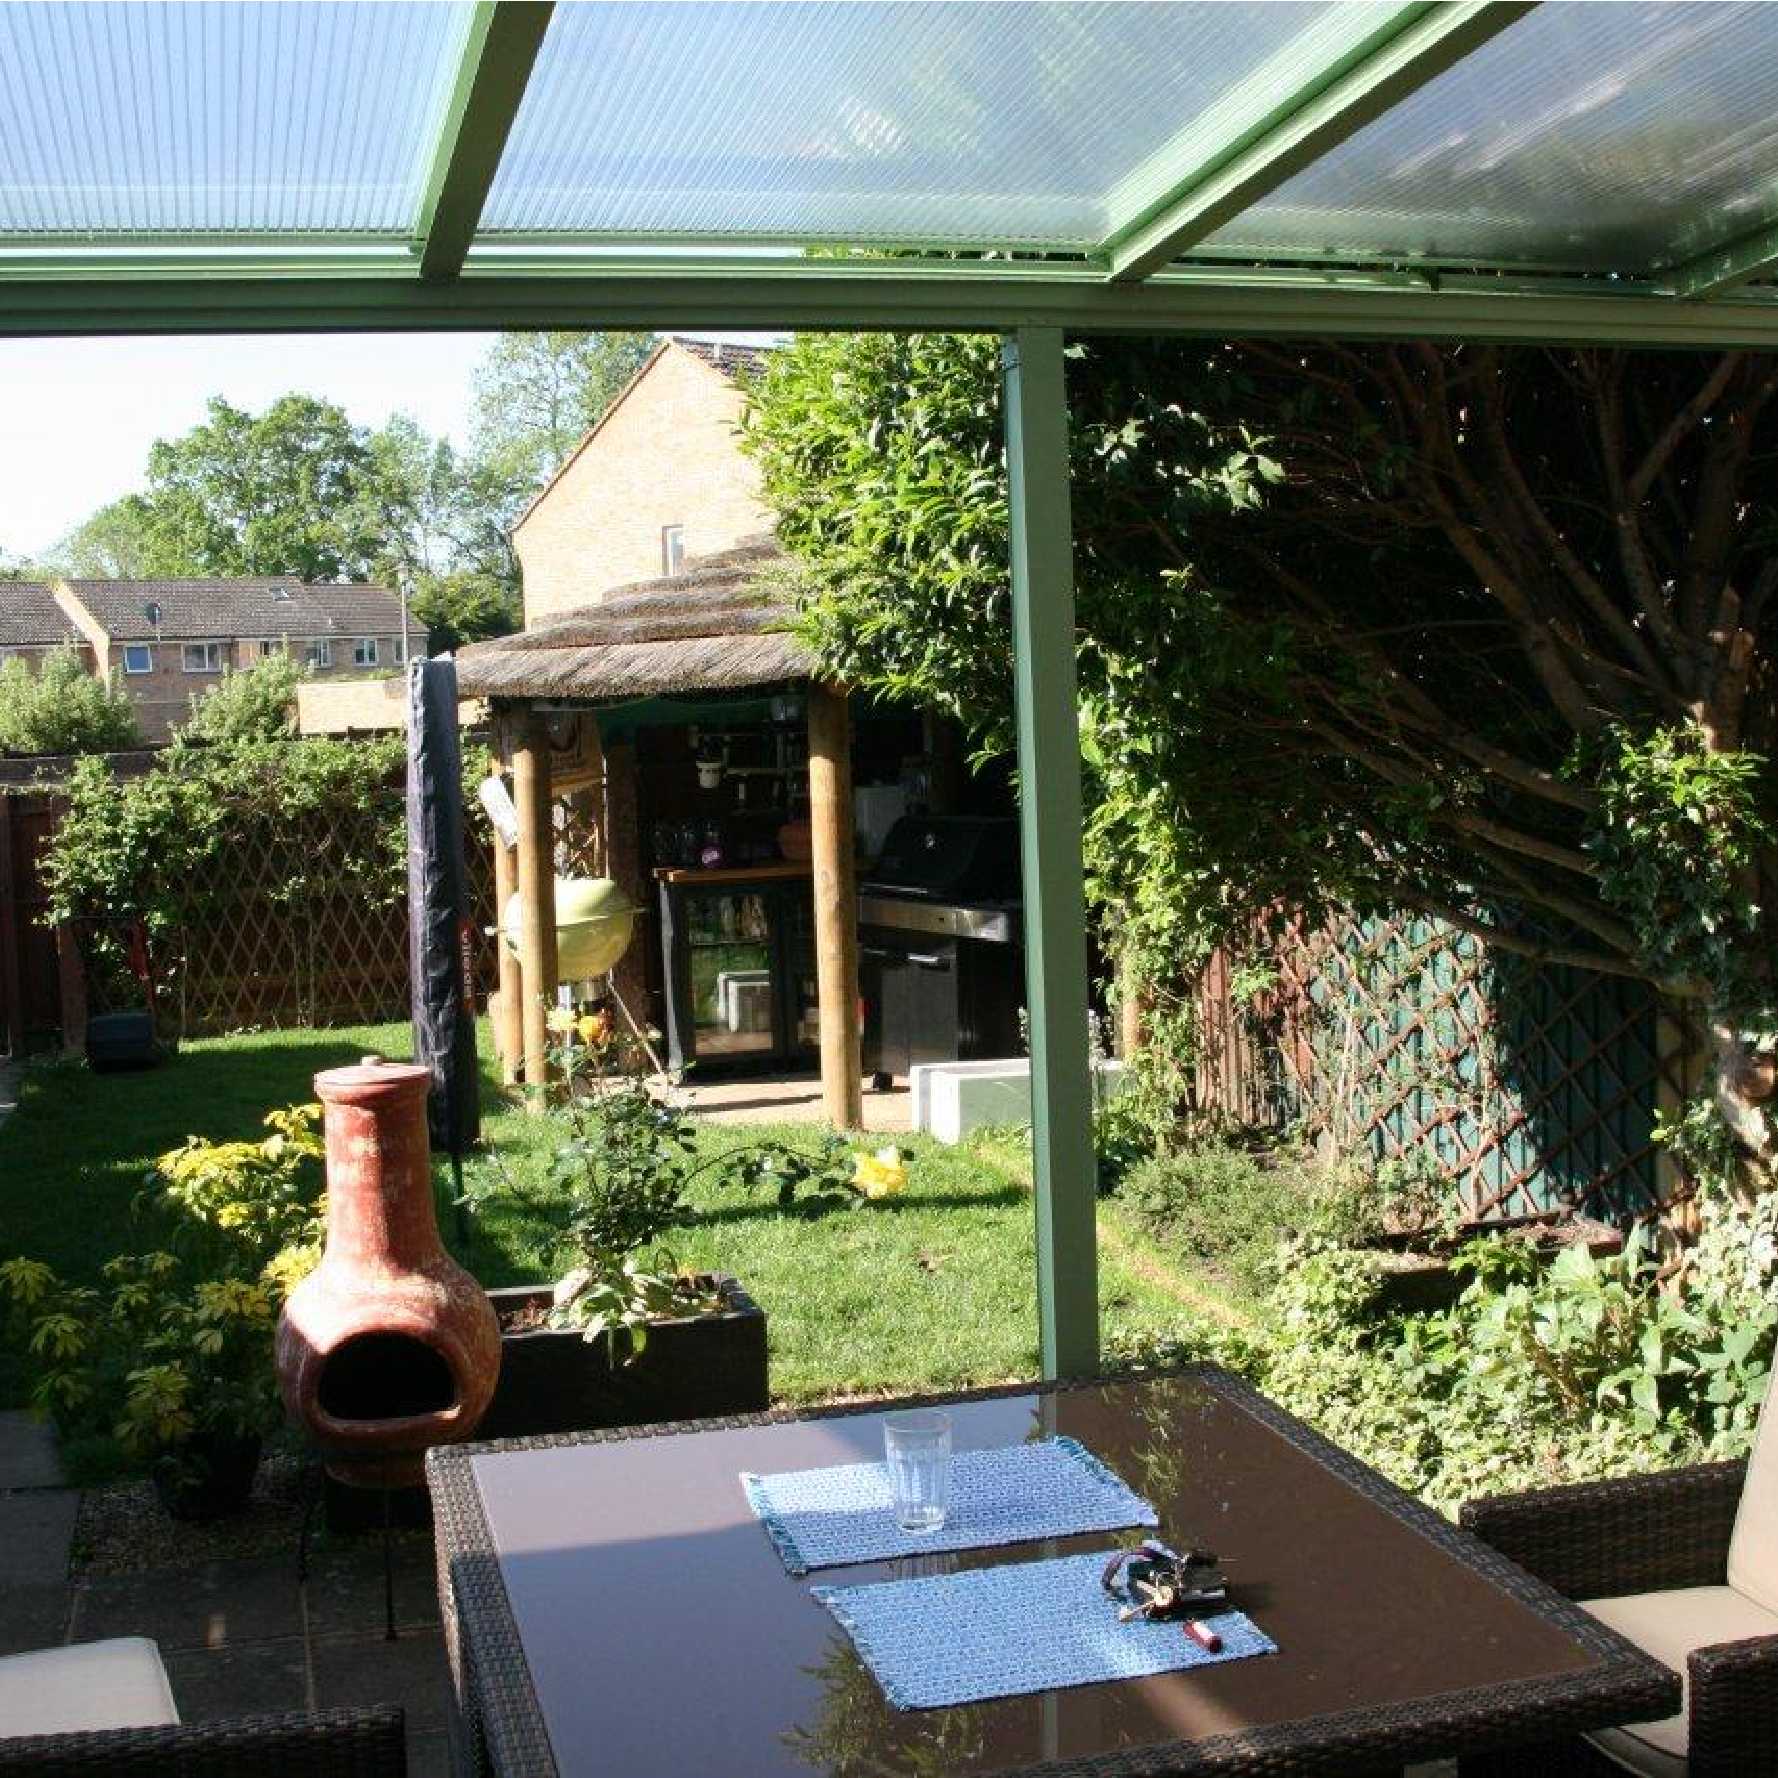 Affordable Omega Smart Lean-To Canopy, White with 16mm Polycarbonate Glazing - 5.2m (W) x 1.5m (P), (3) Supporting Posts